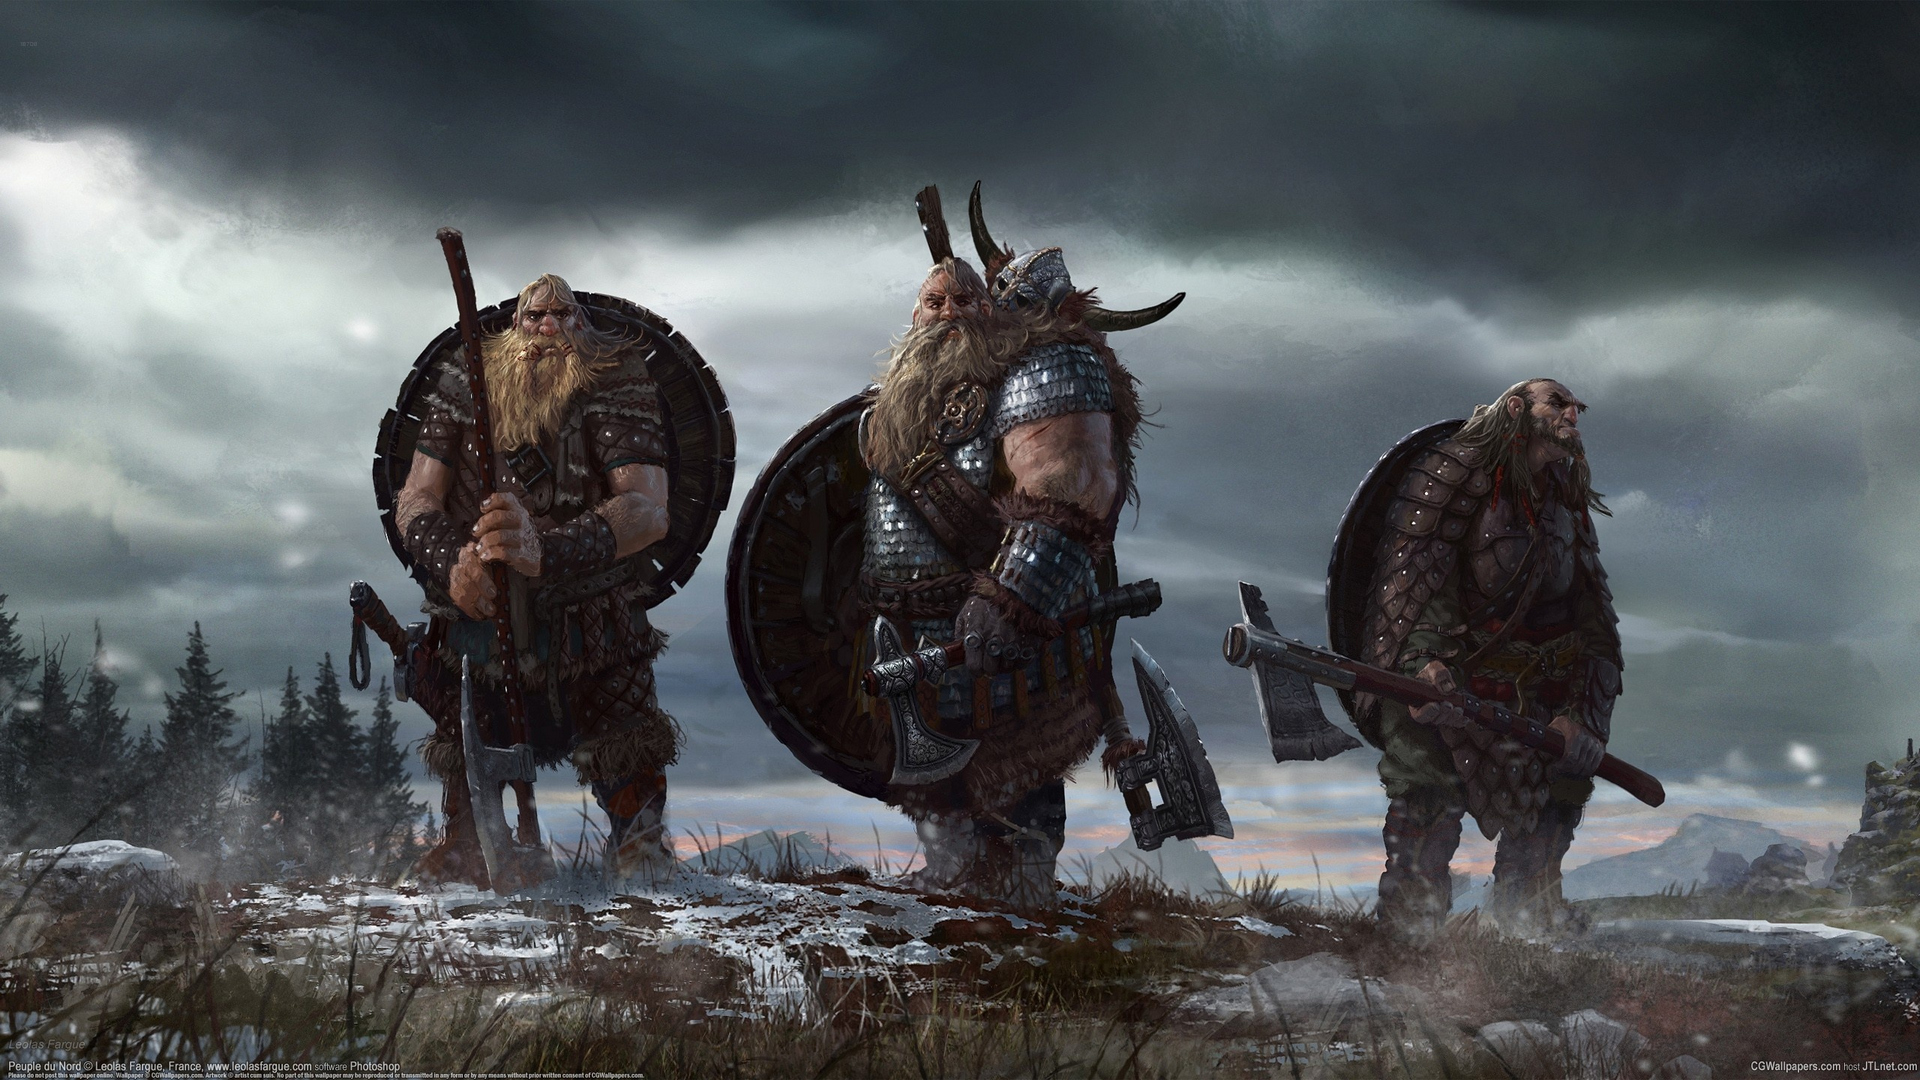 Vikings never wore horns on their helmets. The popular image of Vikings with horned helmets originated from an opera by Richard Wagner in 1876. More info on <a href="http://www.scribd.com/doc/51267328/Frank-Invention-of-Horned-Helmet" target="_blank">Scribd</a>.